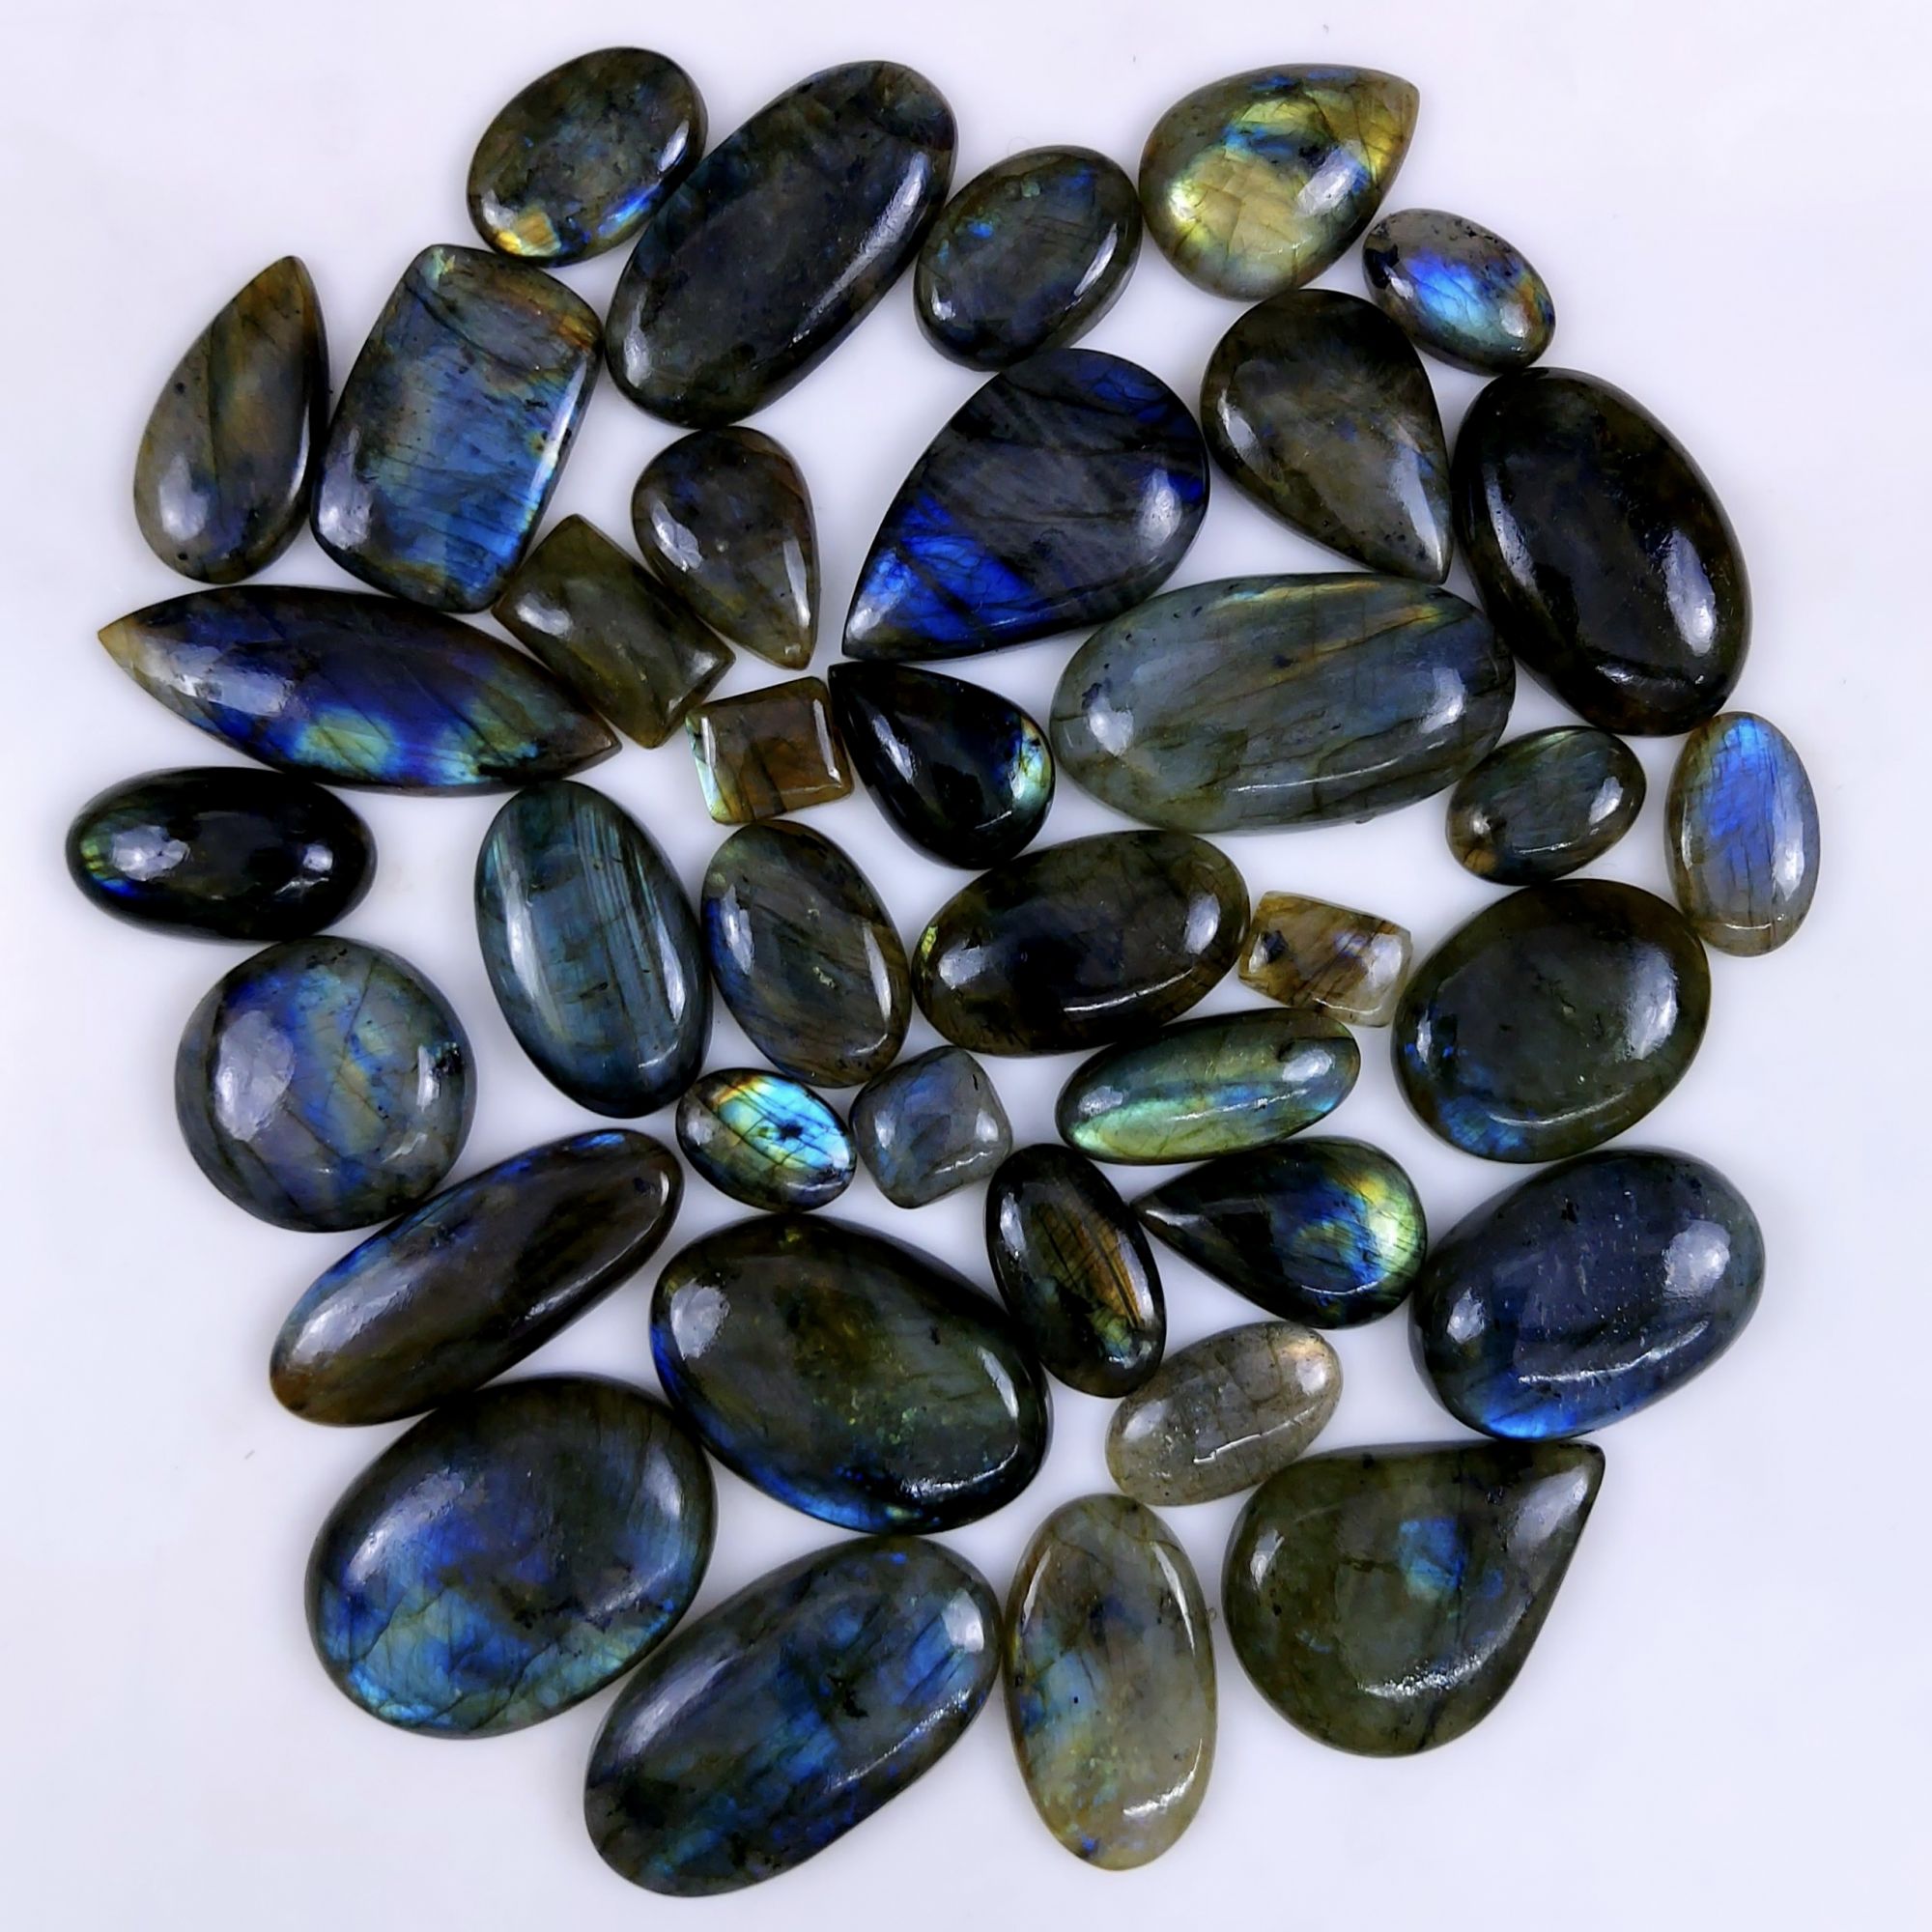 38pc 1676Cts Labradorite Cabochon Multifire Healing Crystal For Jewelry Supplies, Labradorite Necklace Handmade Wire Wrapped Gemstone Pendant 47x27 12x9mm#6322